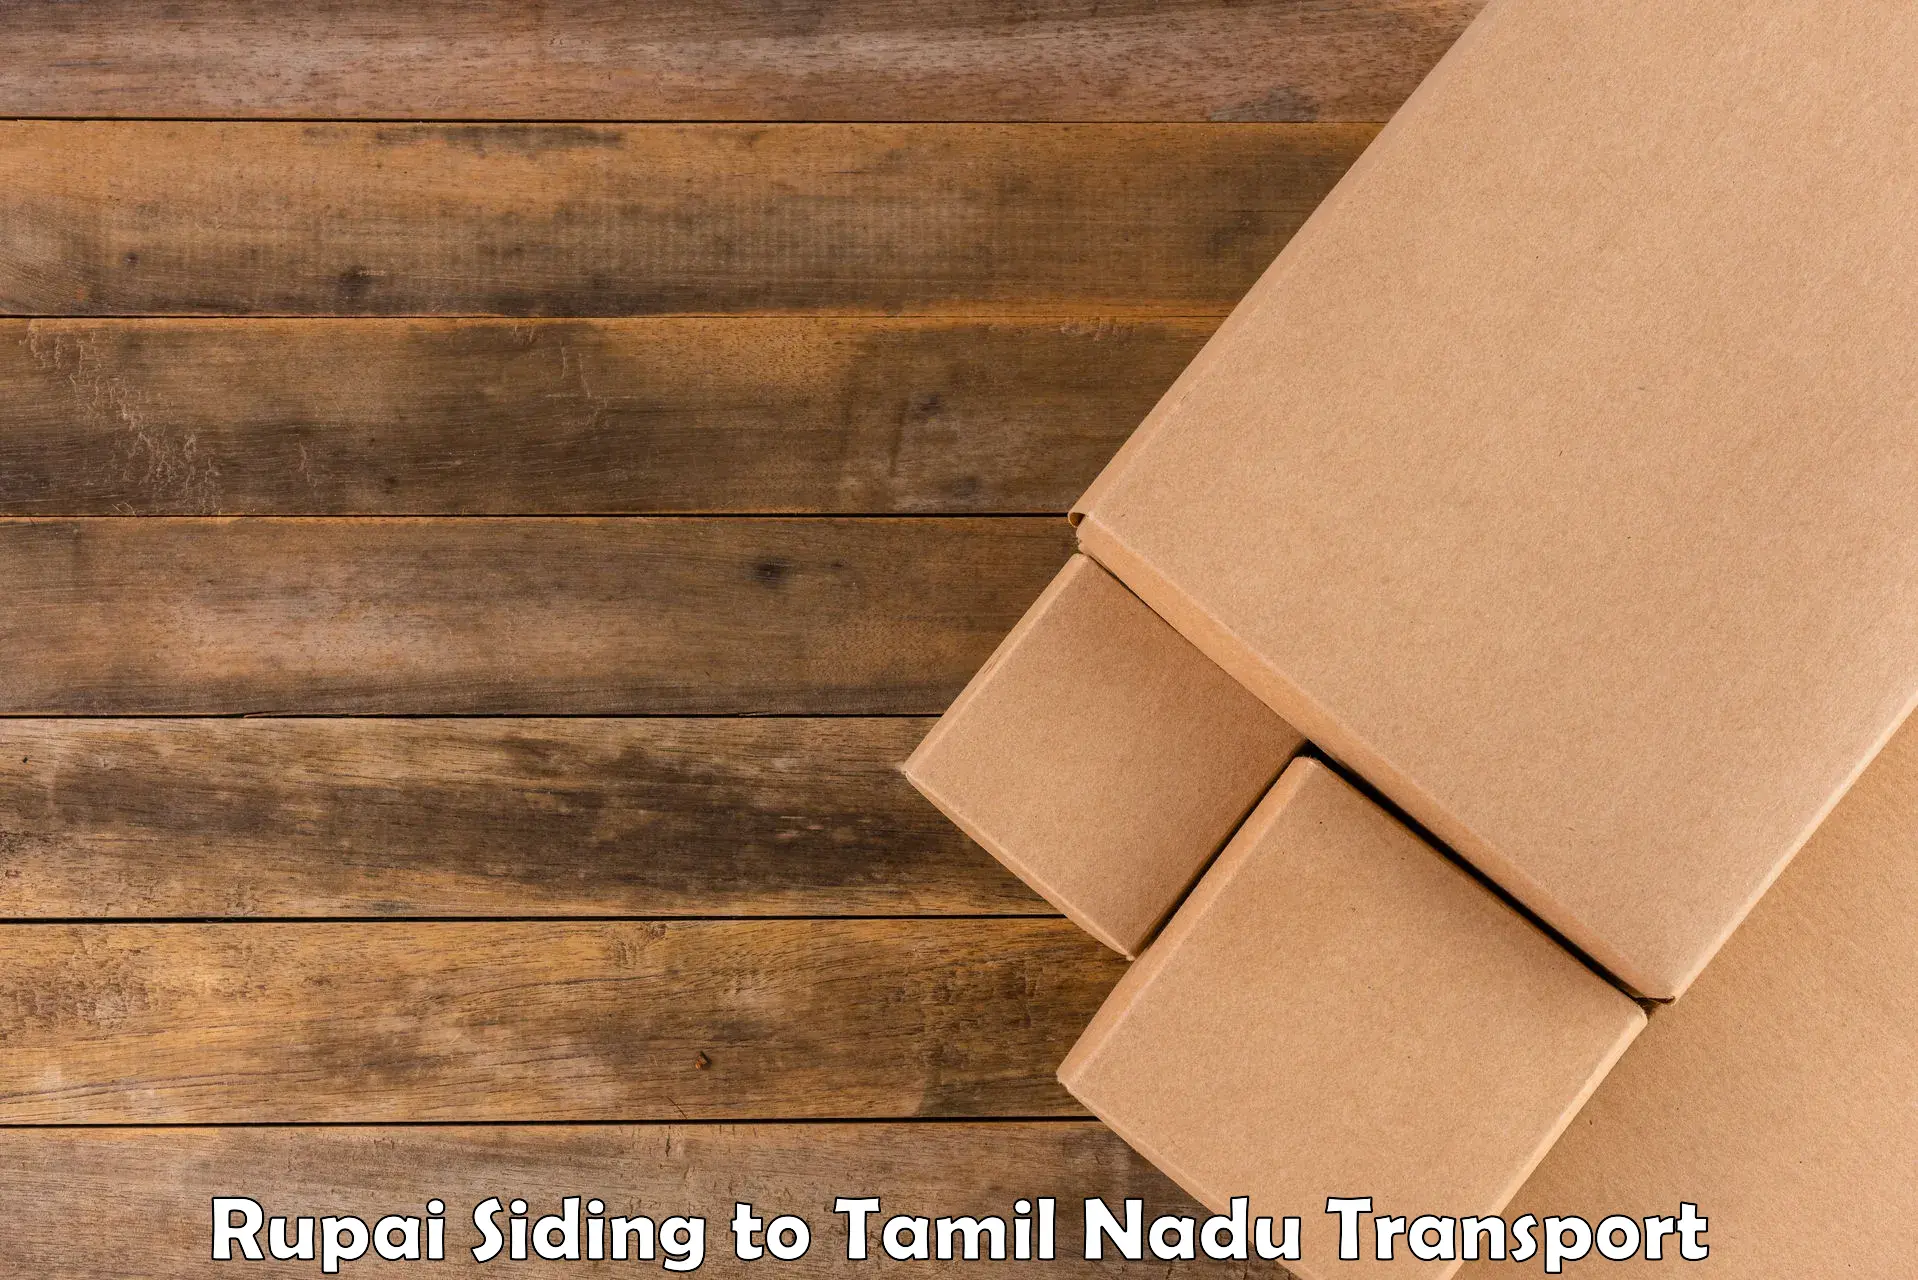 Cargo transport services Rupai Siding to SRM Institute of Science and Technology Chennai